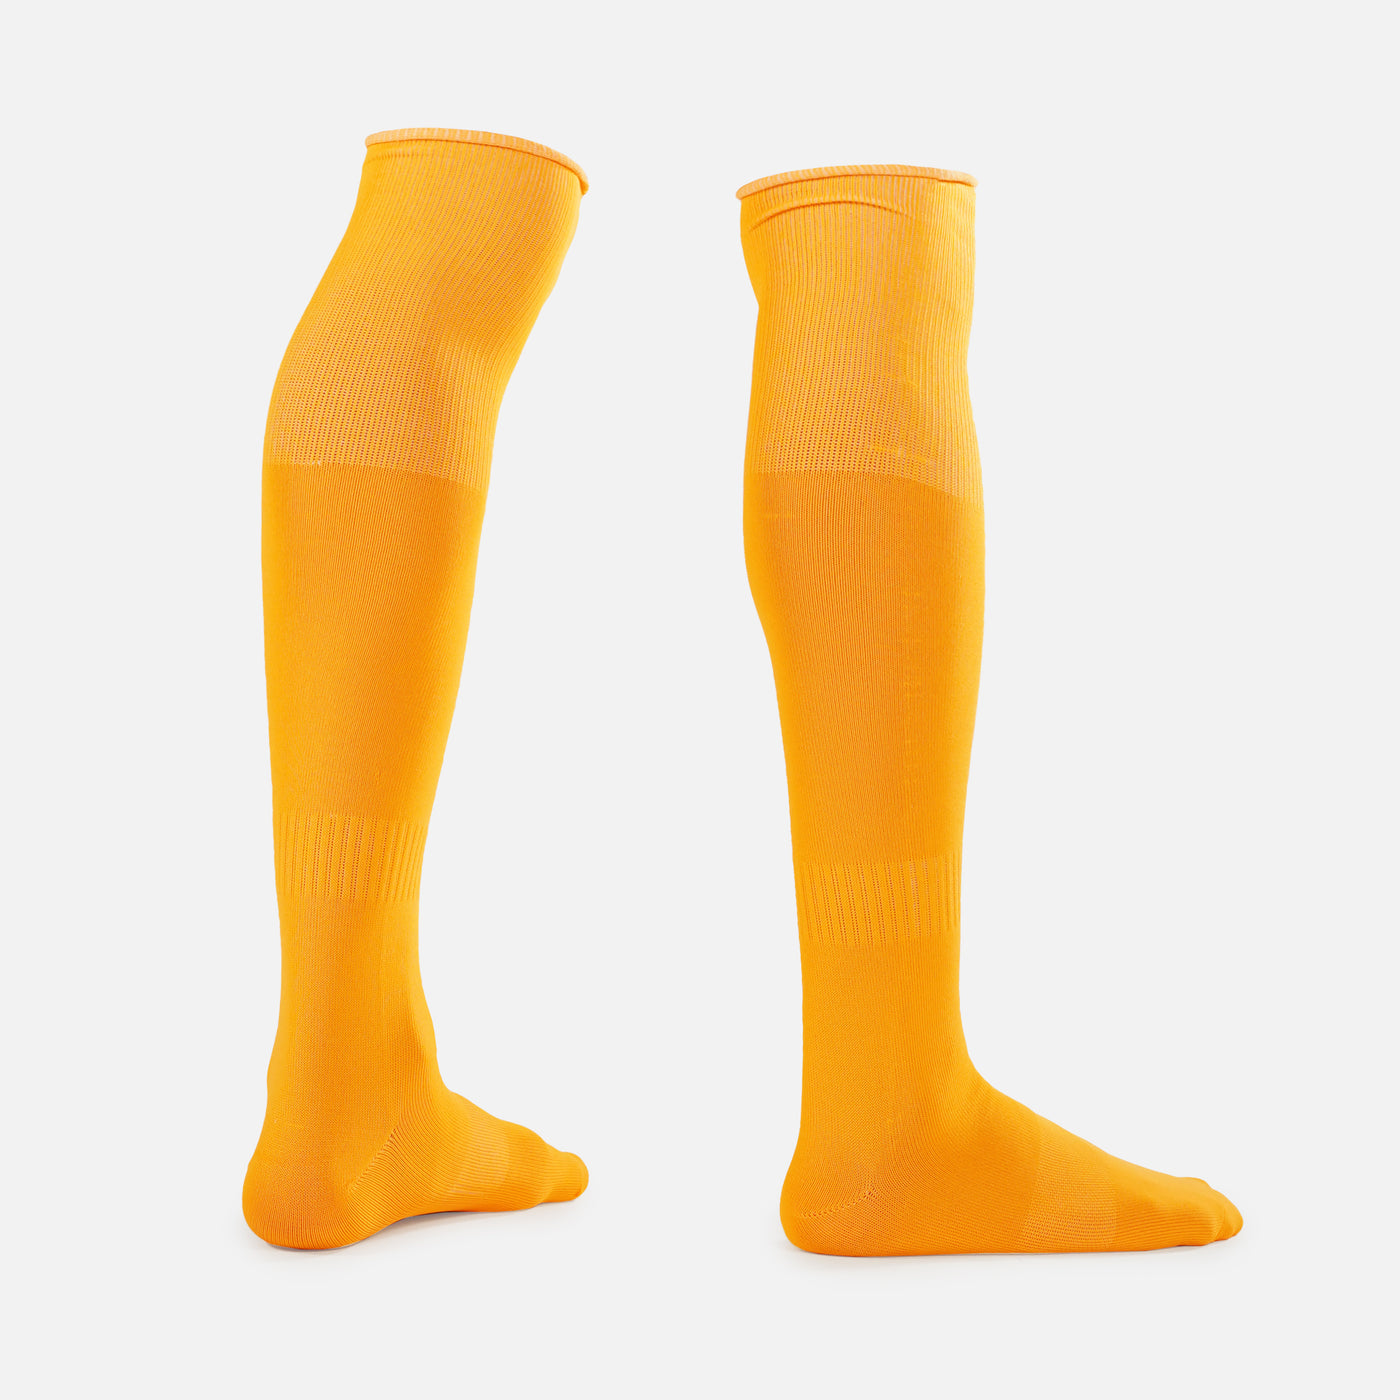 Hue Yellow Gold Over The Knee Sport Socks